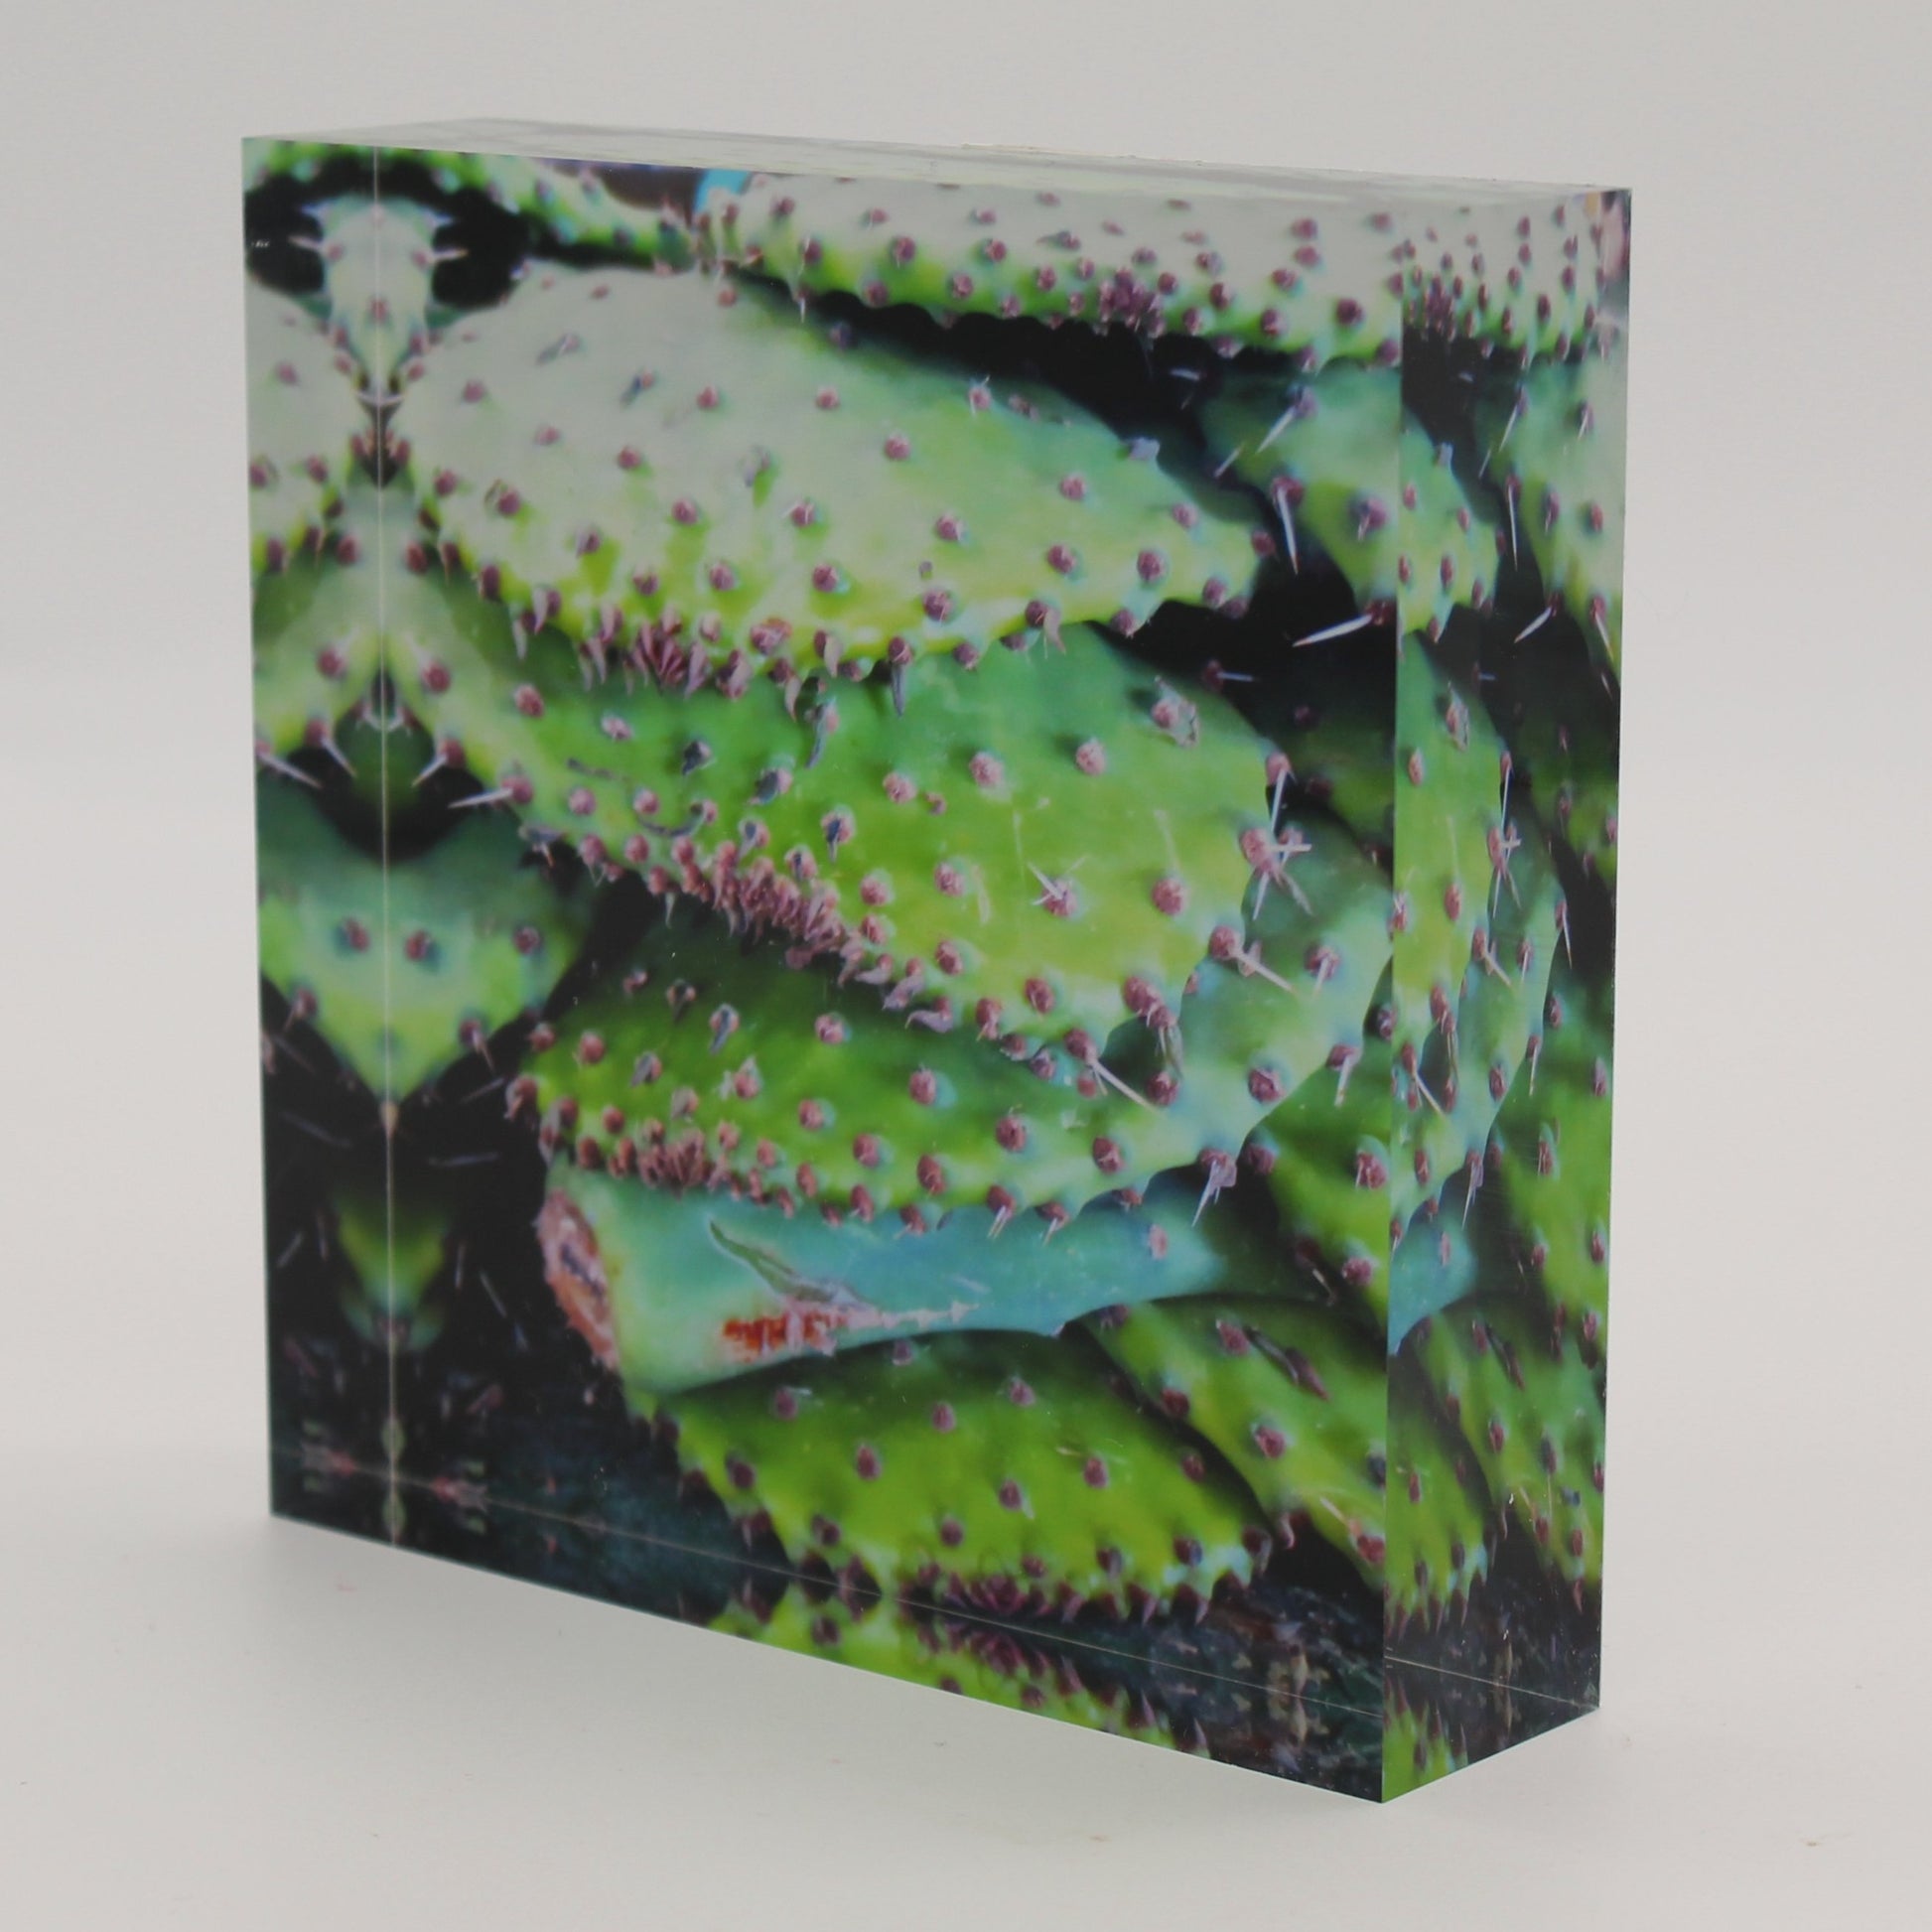 Tilted view of Acrylic block picture of green cactus pads and pink thorns